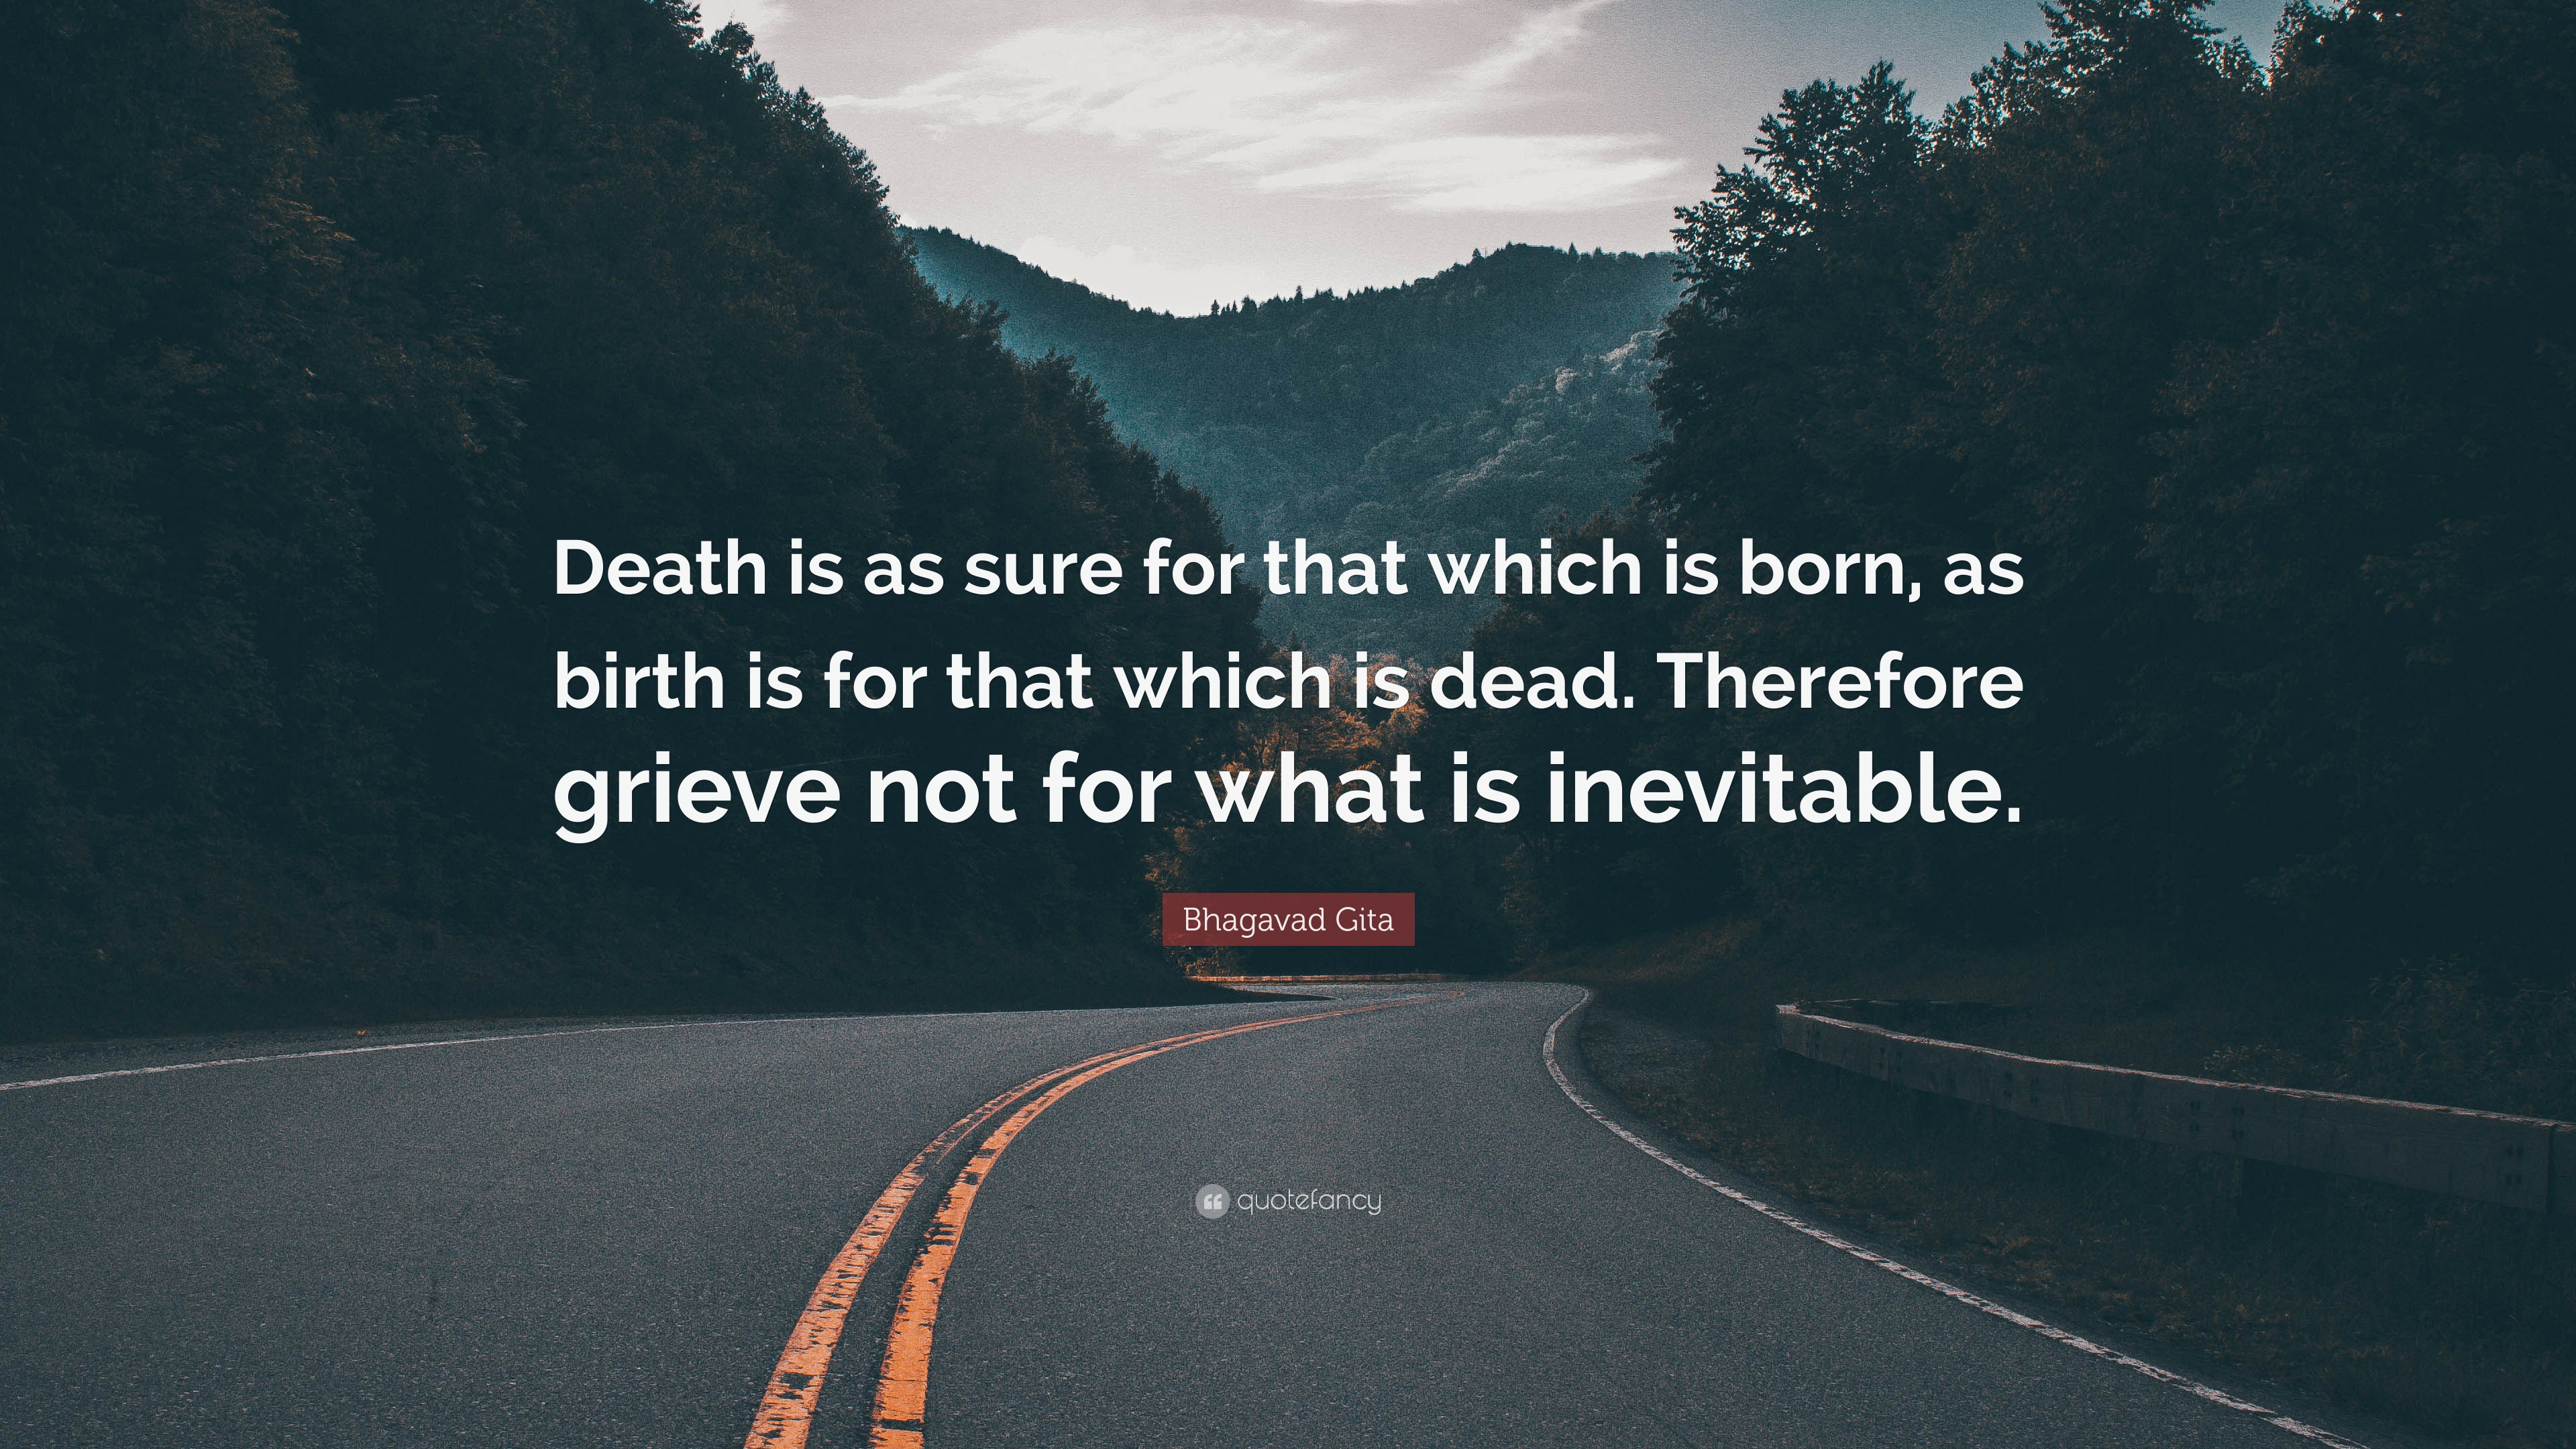 Bhagavad Gita Quote: “Death is as sure for that which is born, as birth ...